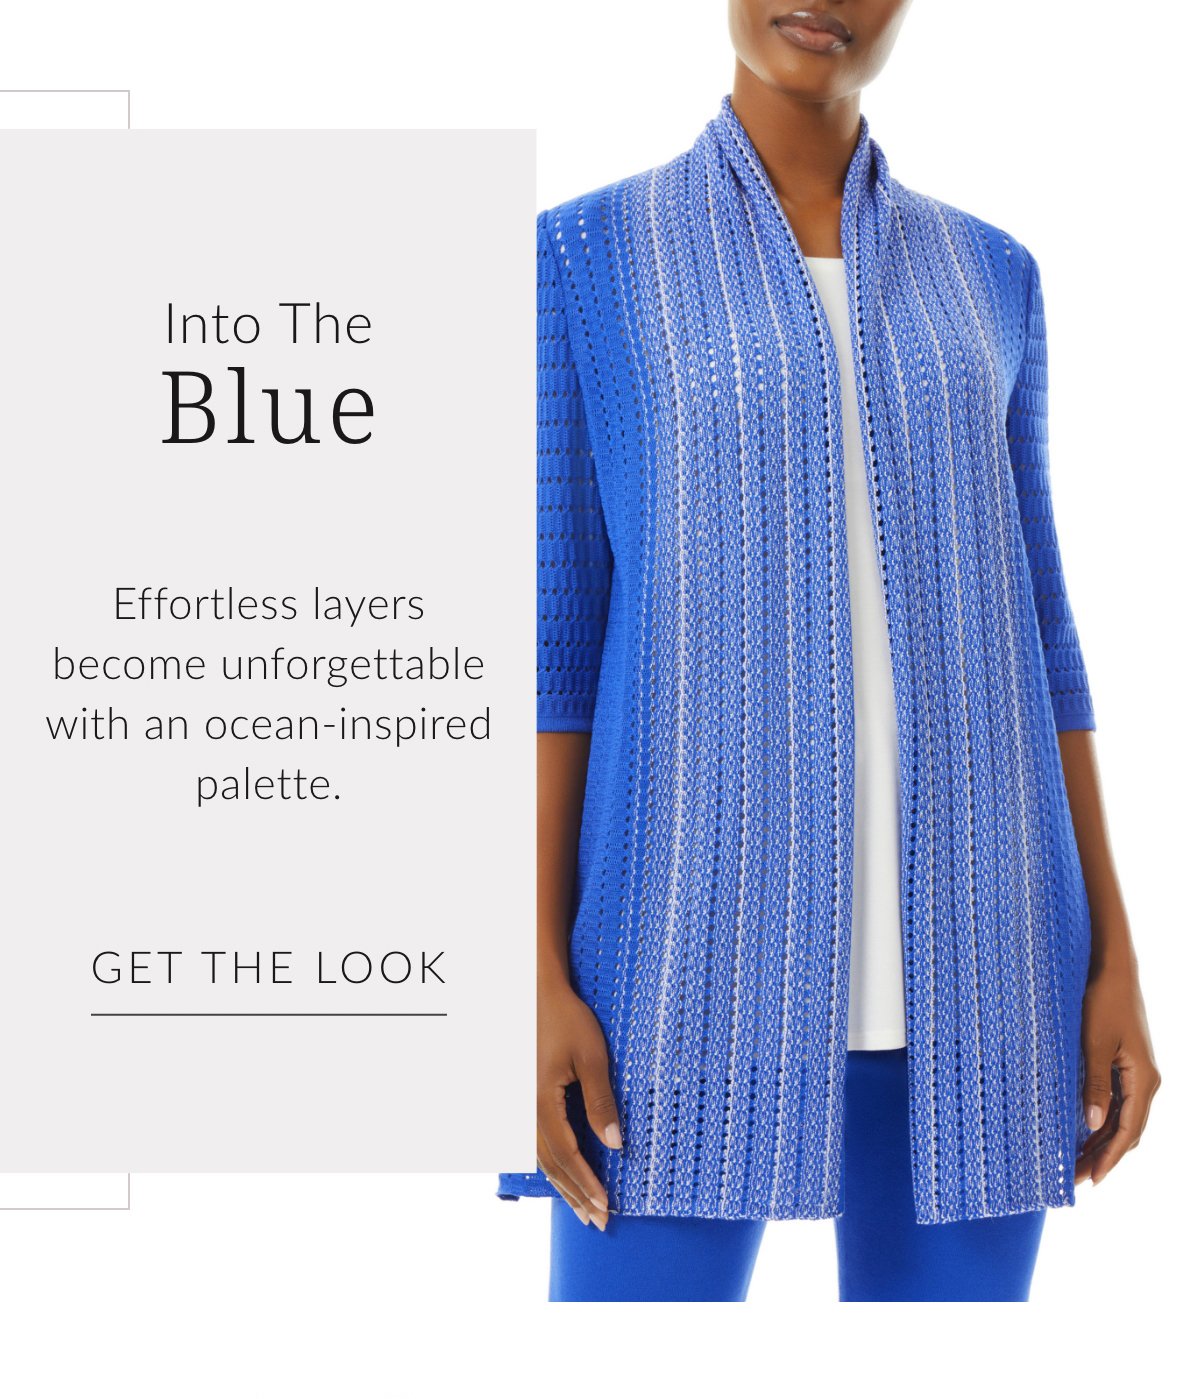 Into the Blue - Effortless layers become unforgettable with an ocean-inspired palette. Get the Look >>